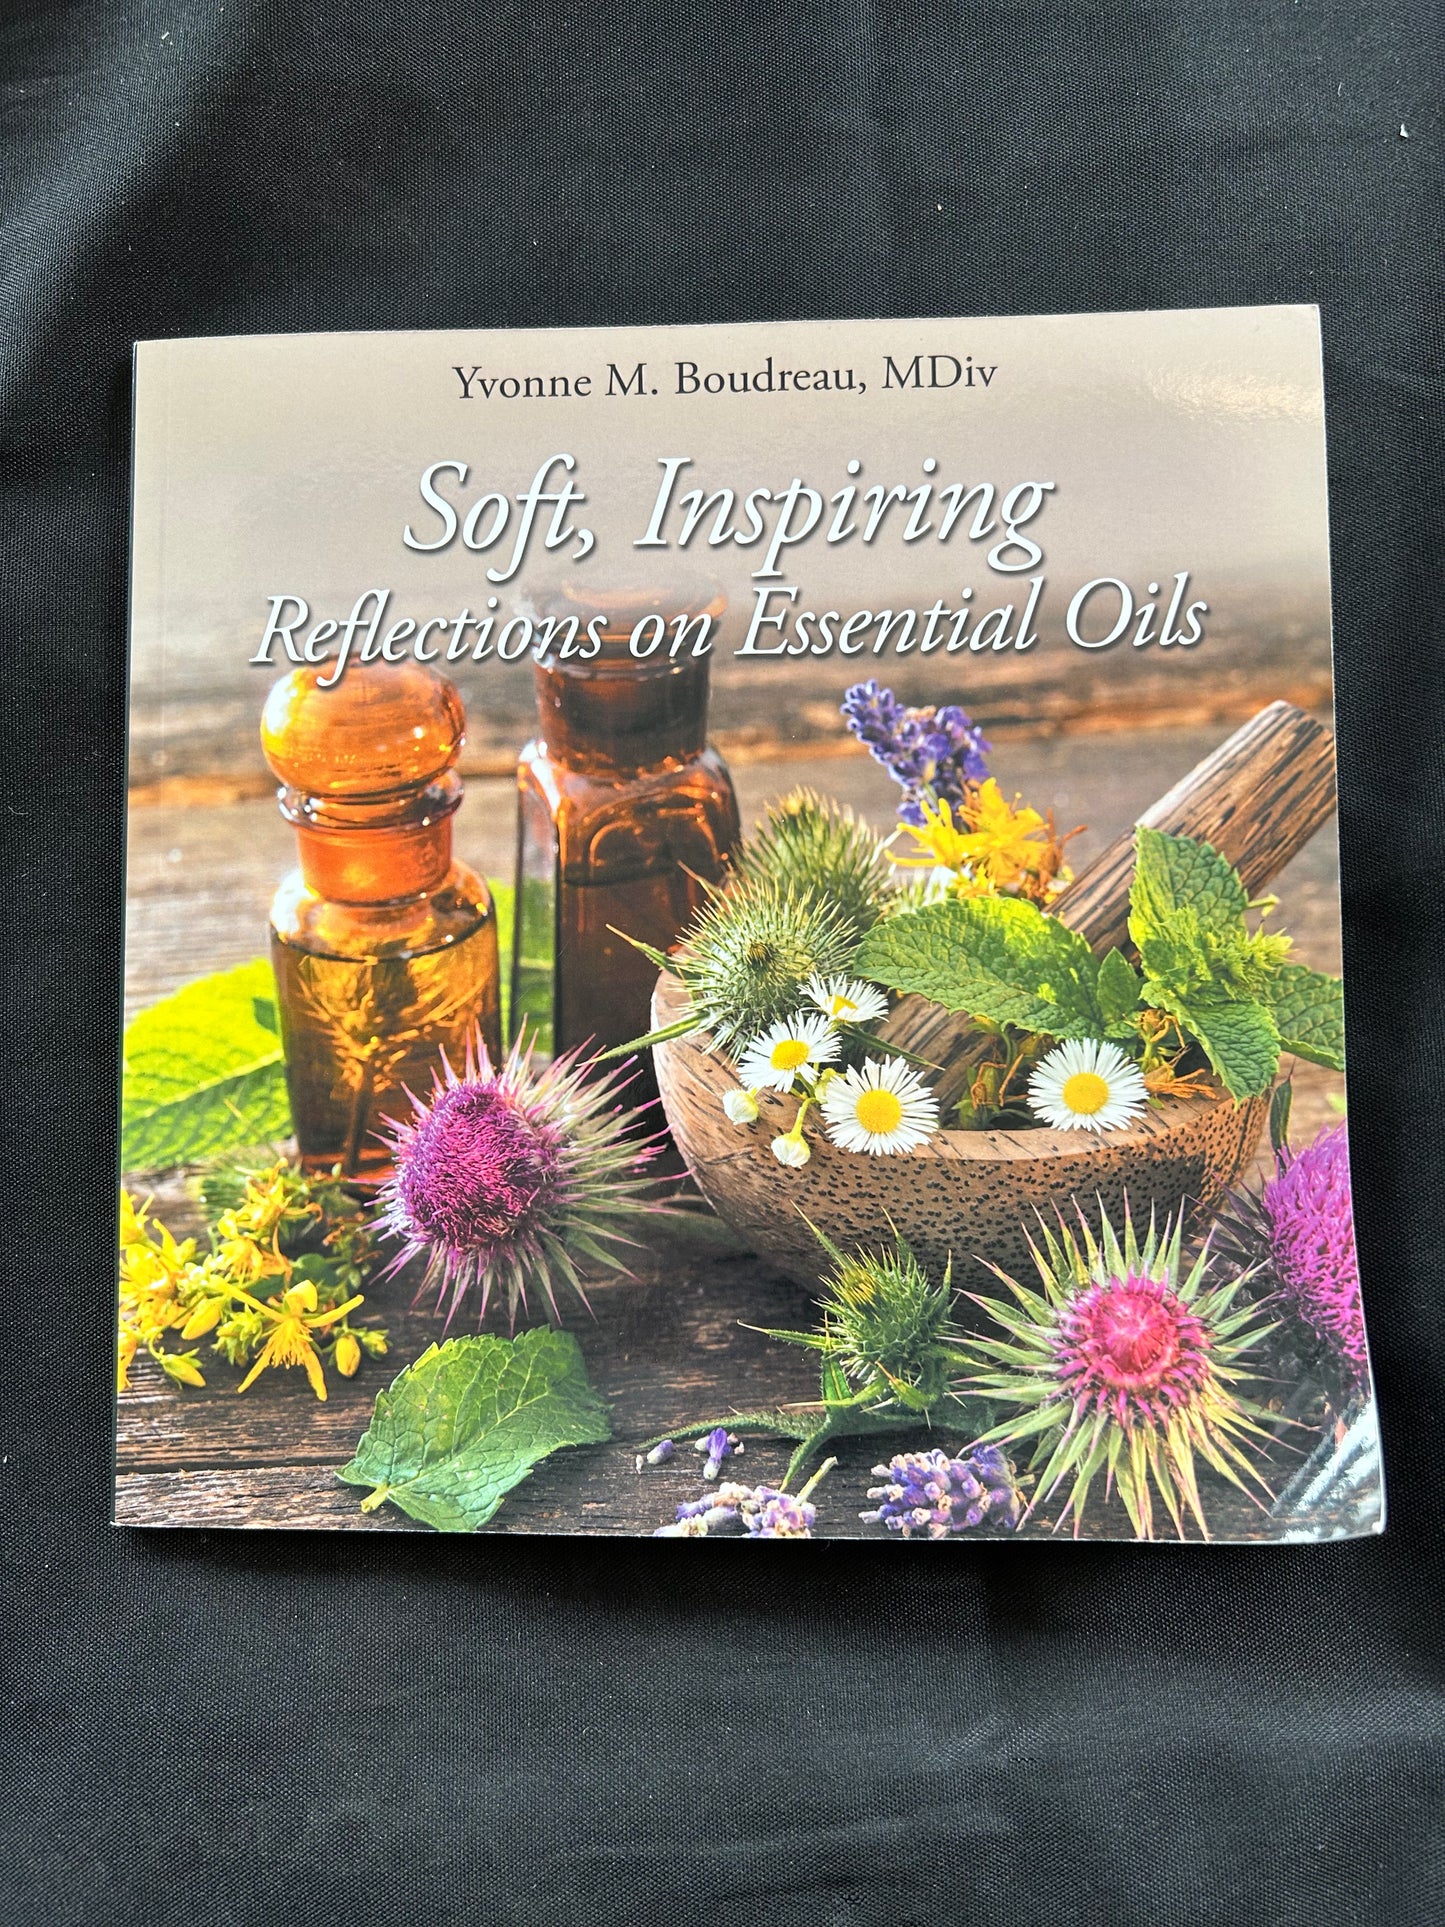 Soft, Inspiring Reflections on Essential Oils